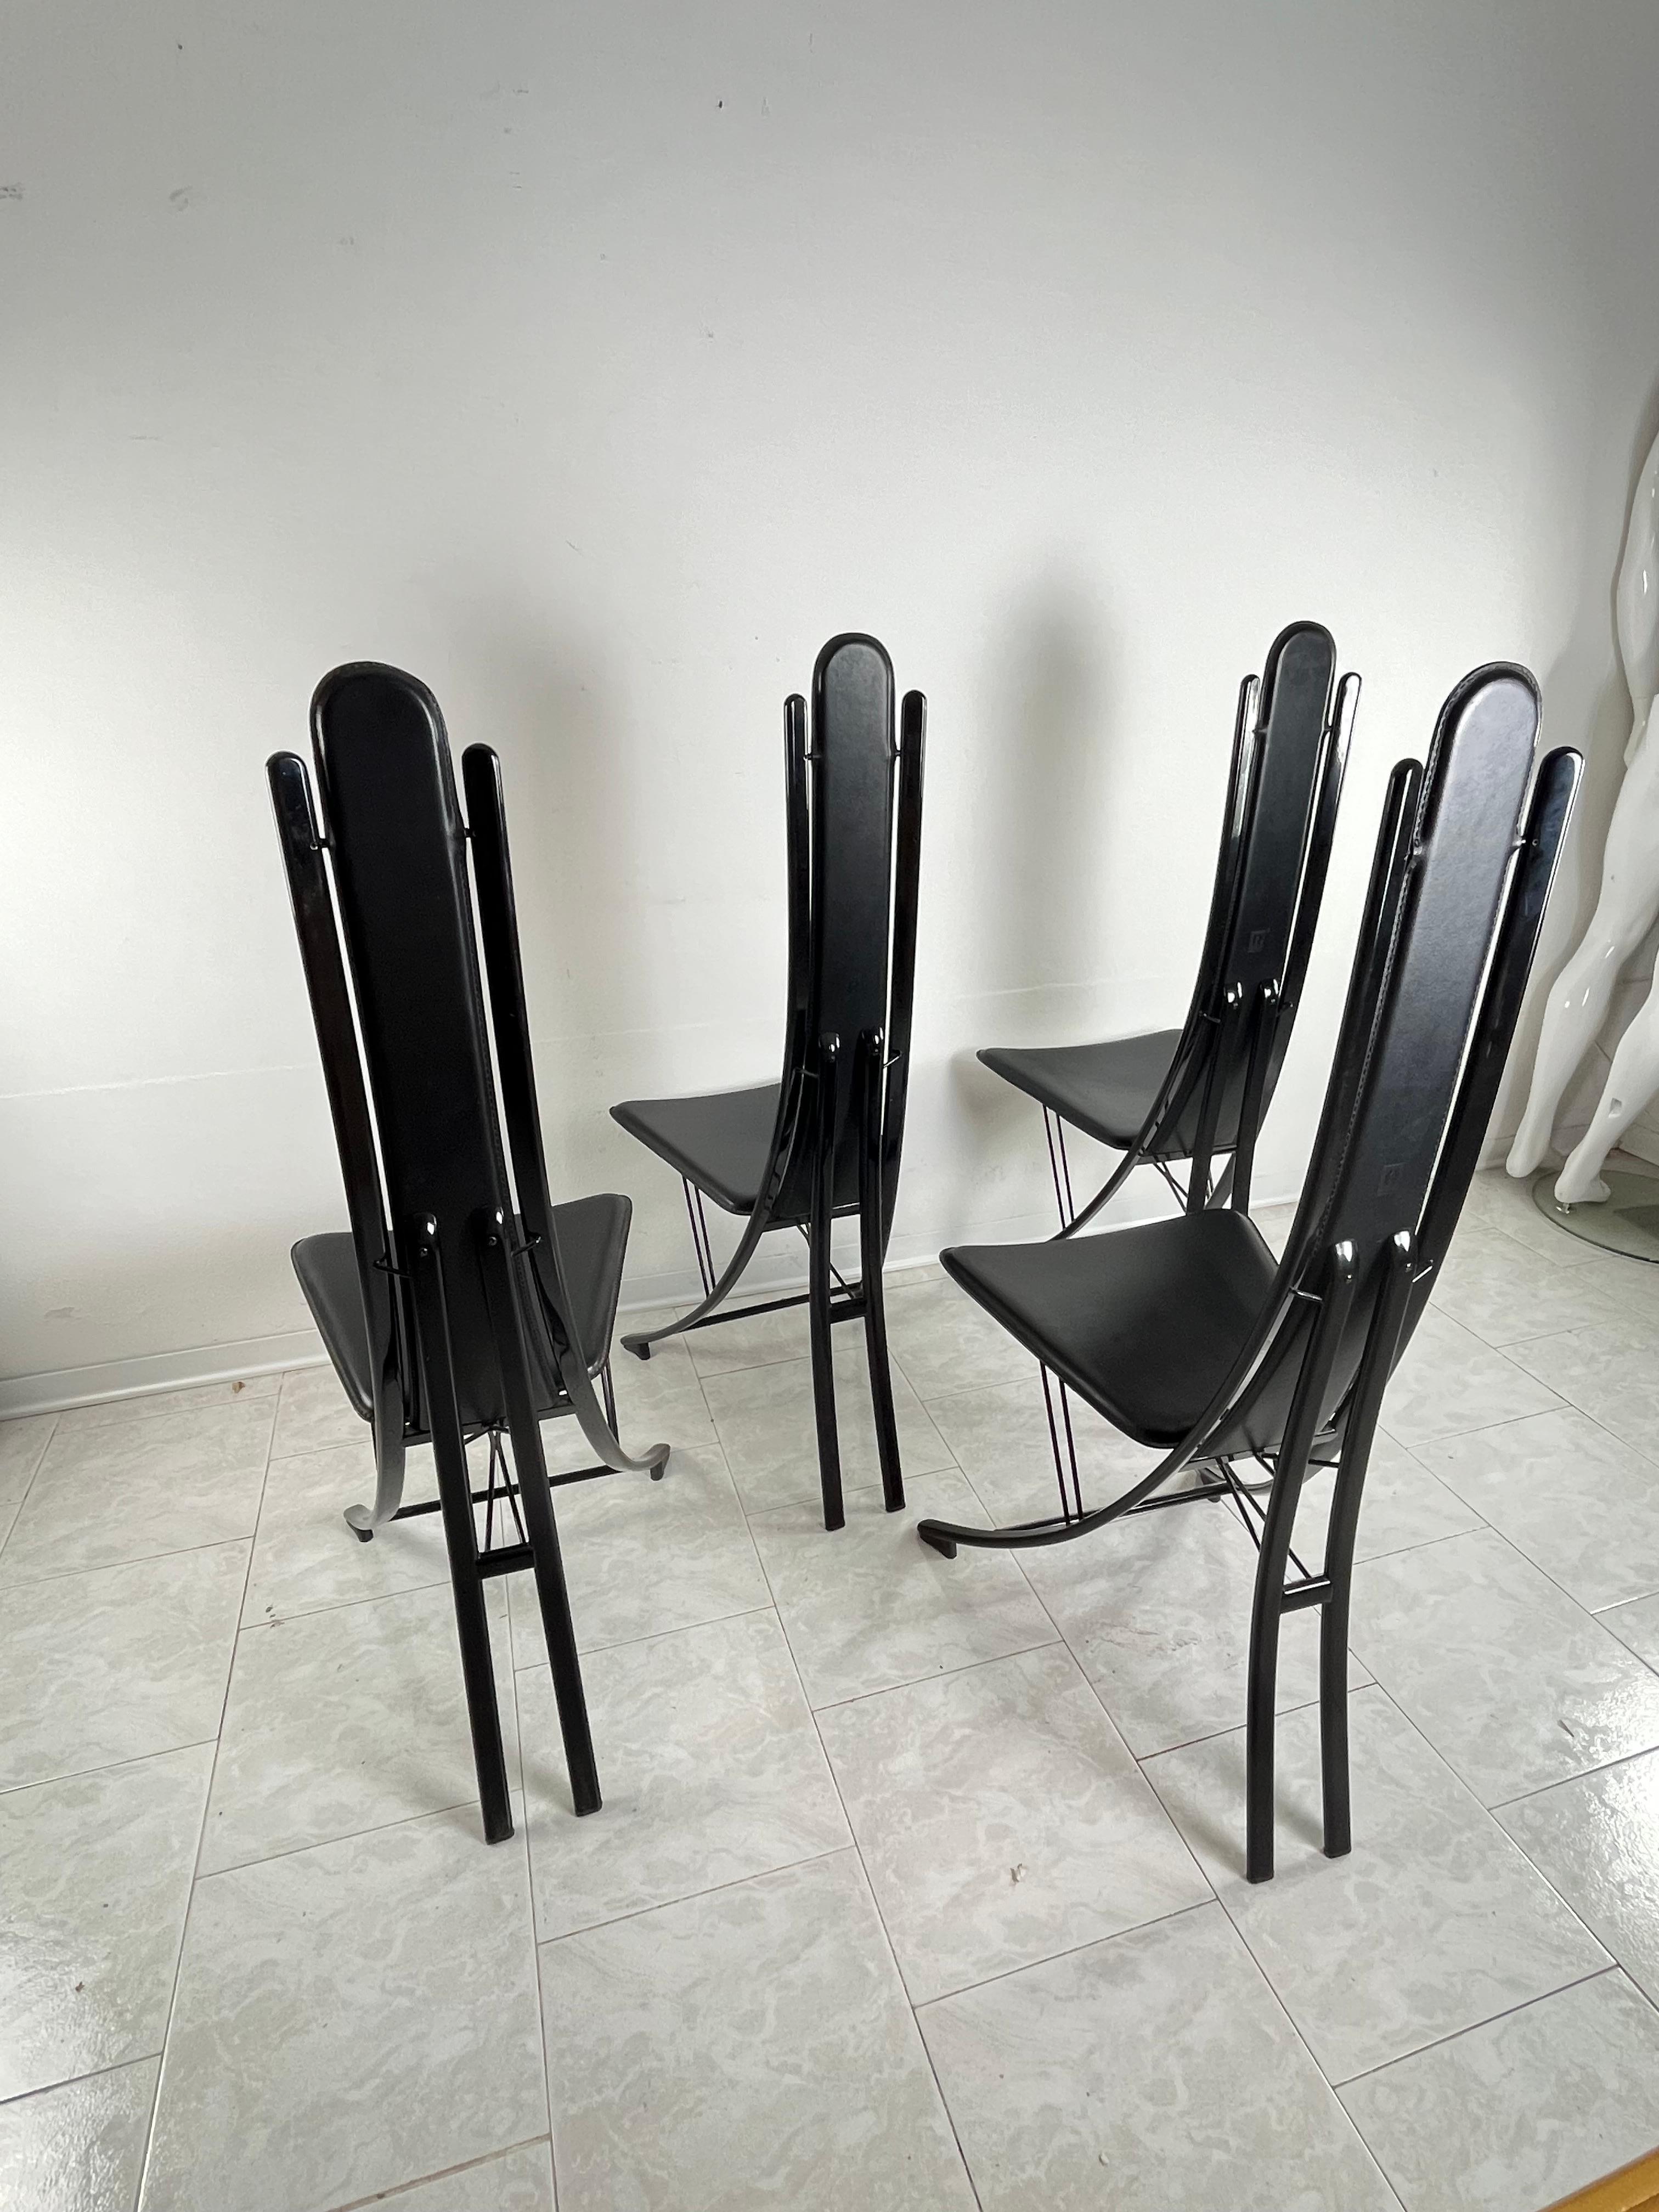 Vintage set of 4 steel and leather chairs attributed to Recanatini, Italian design  1980s
Intact and in good condition, small signs of aging.
They have the attribution mark printed on the leather.
